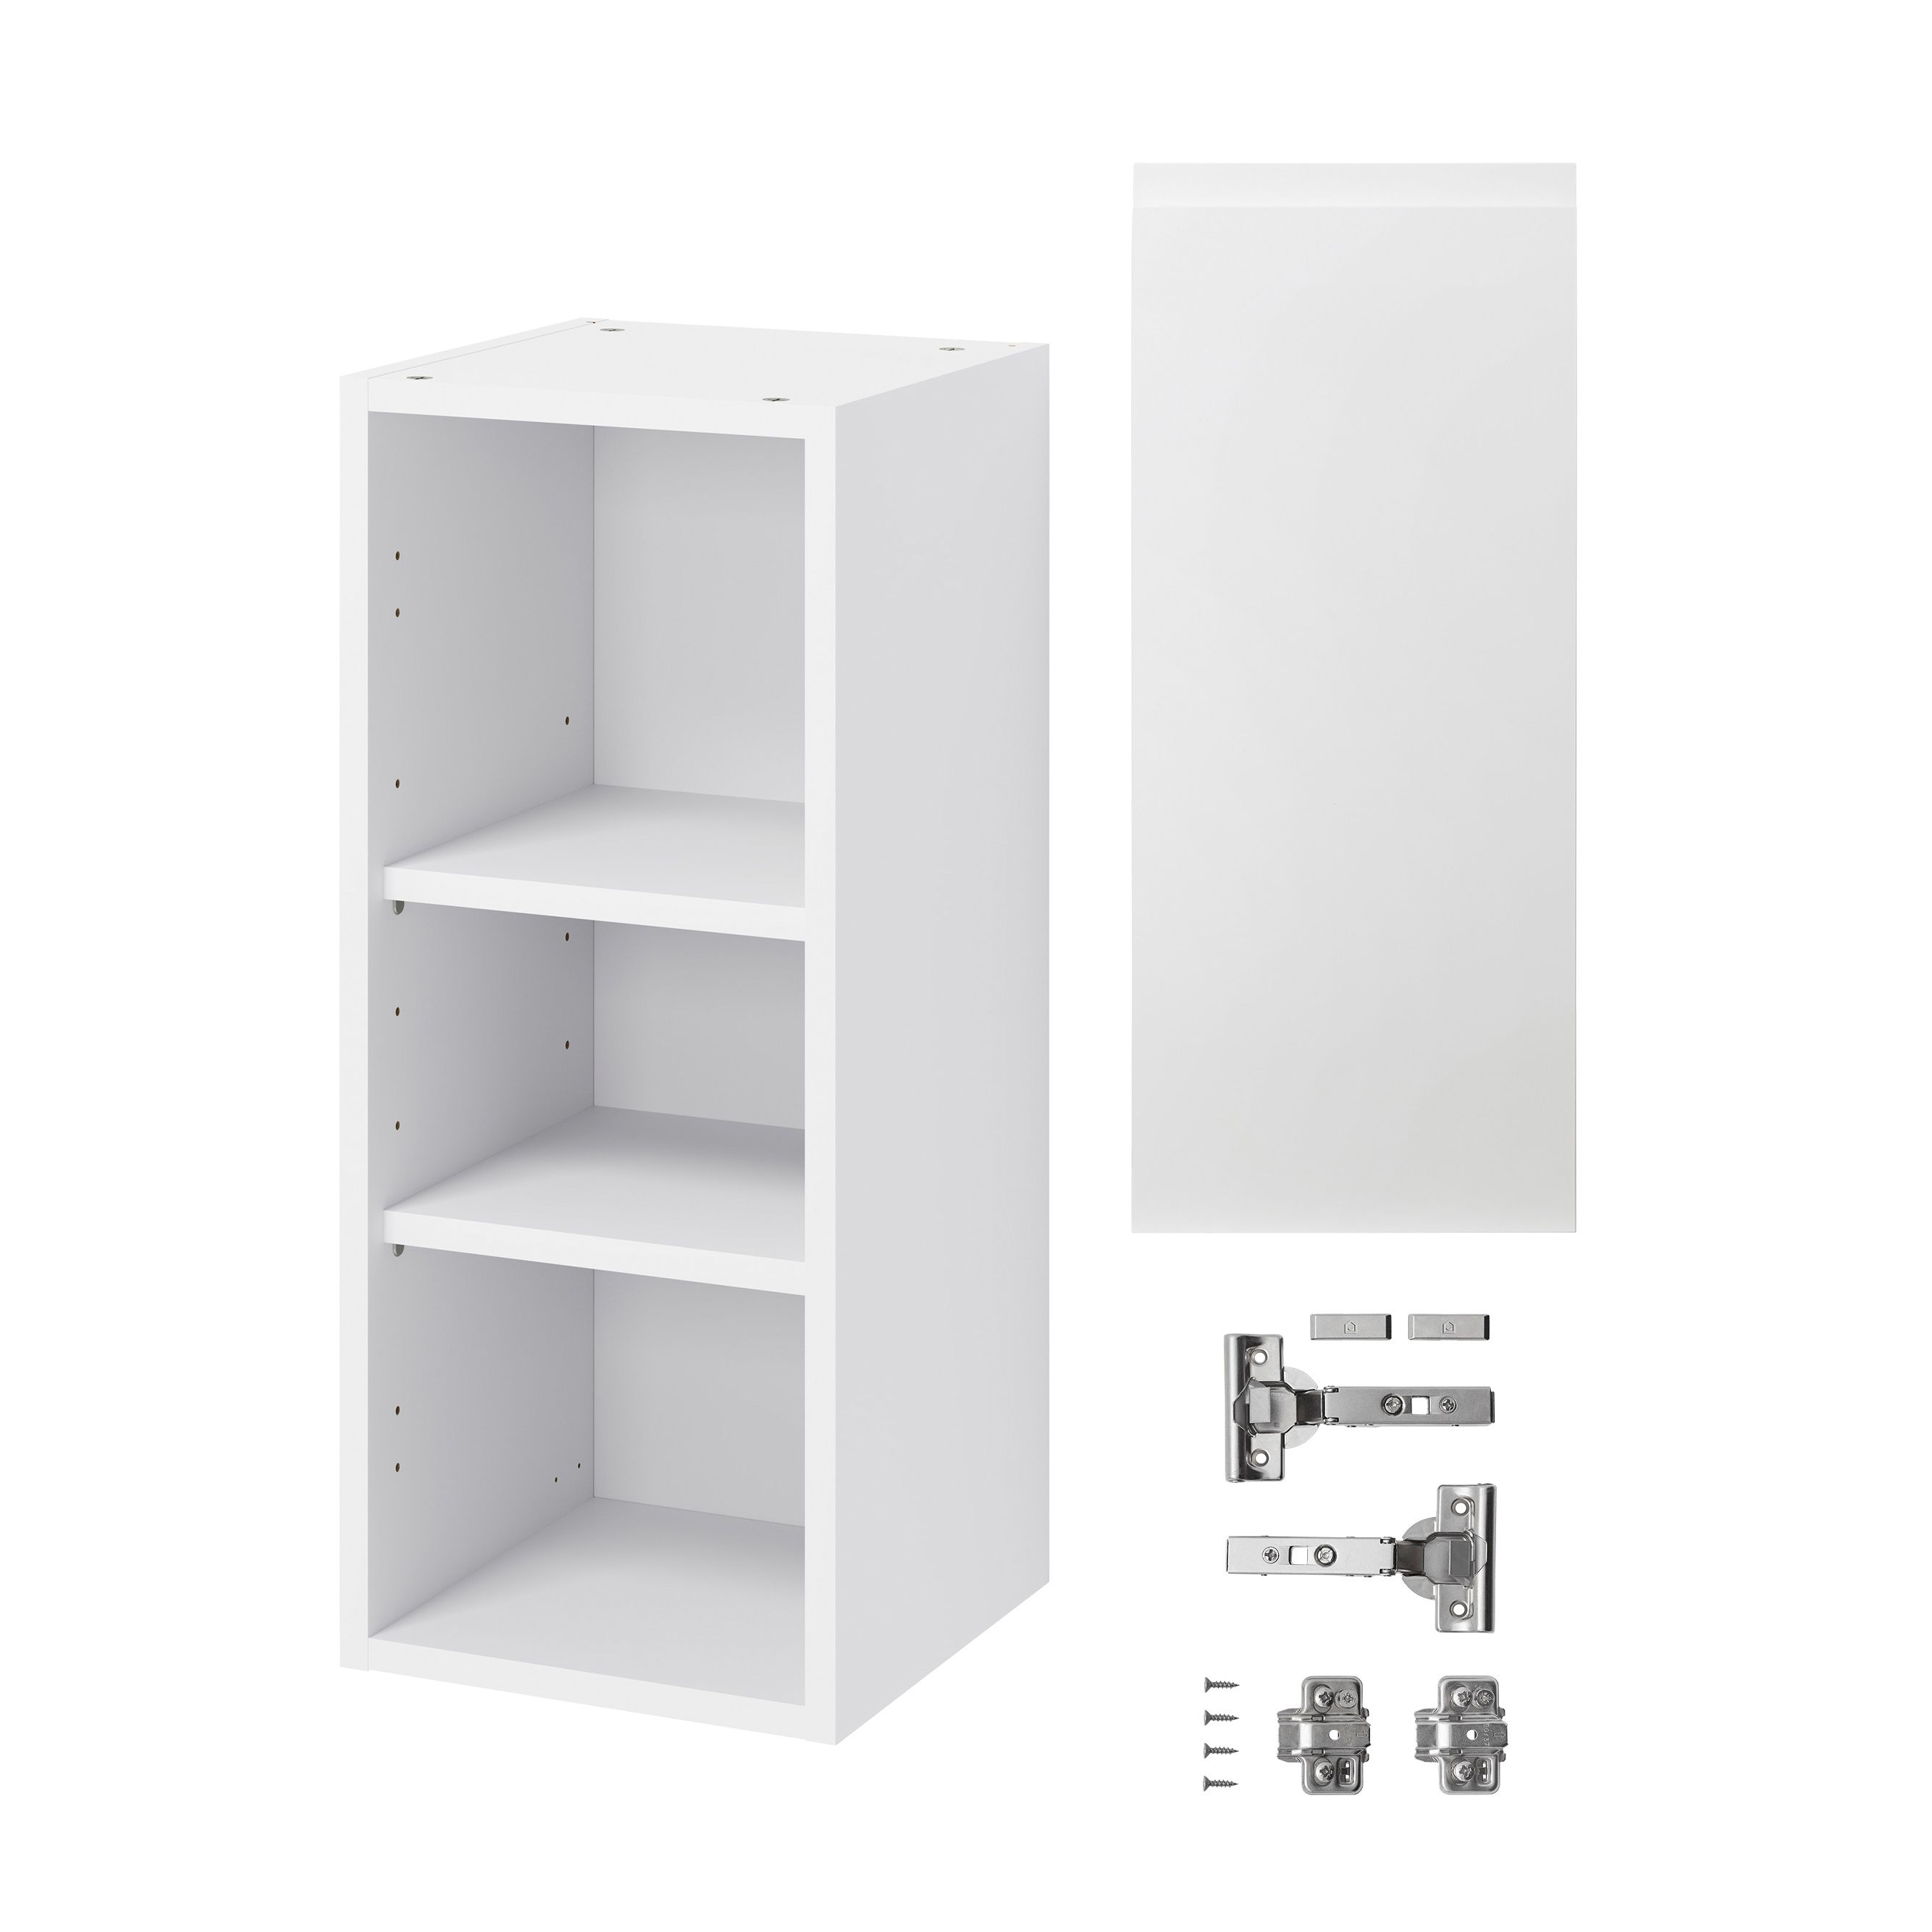 GoodHome Garcinia Gloss white integrated handle Wall Kitchen cabinet (W)300mm (H)720mm